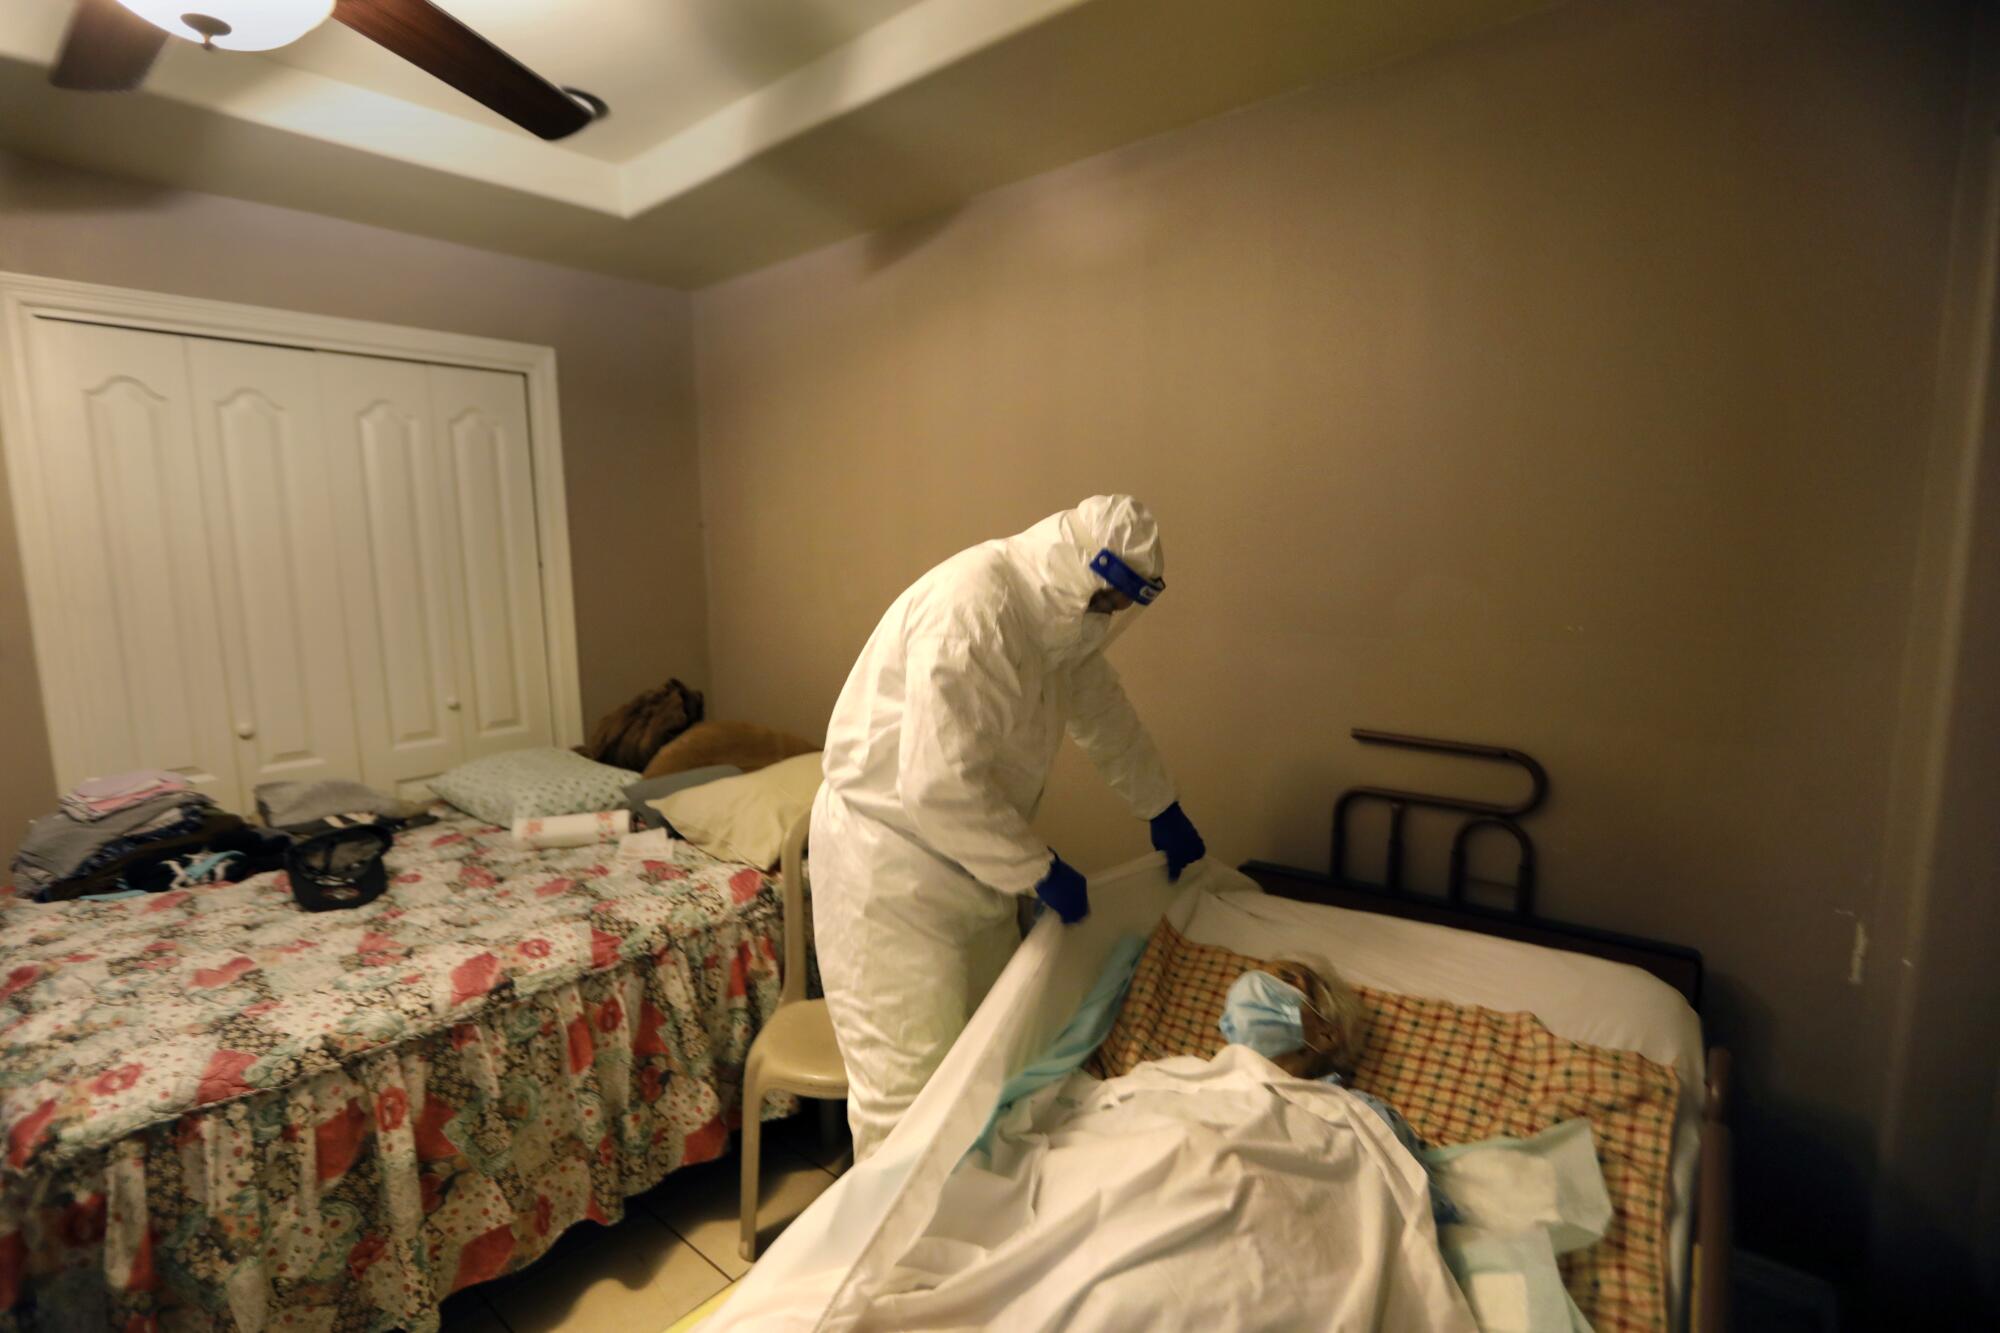 Juan Lopez prepares to remove the body of 91 year-old Amalia Tinoco from her home in Pharr, Texas.